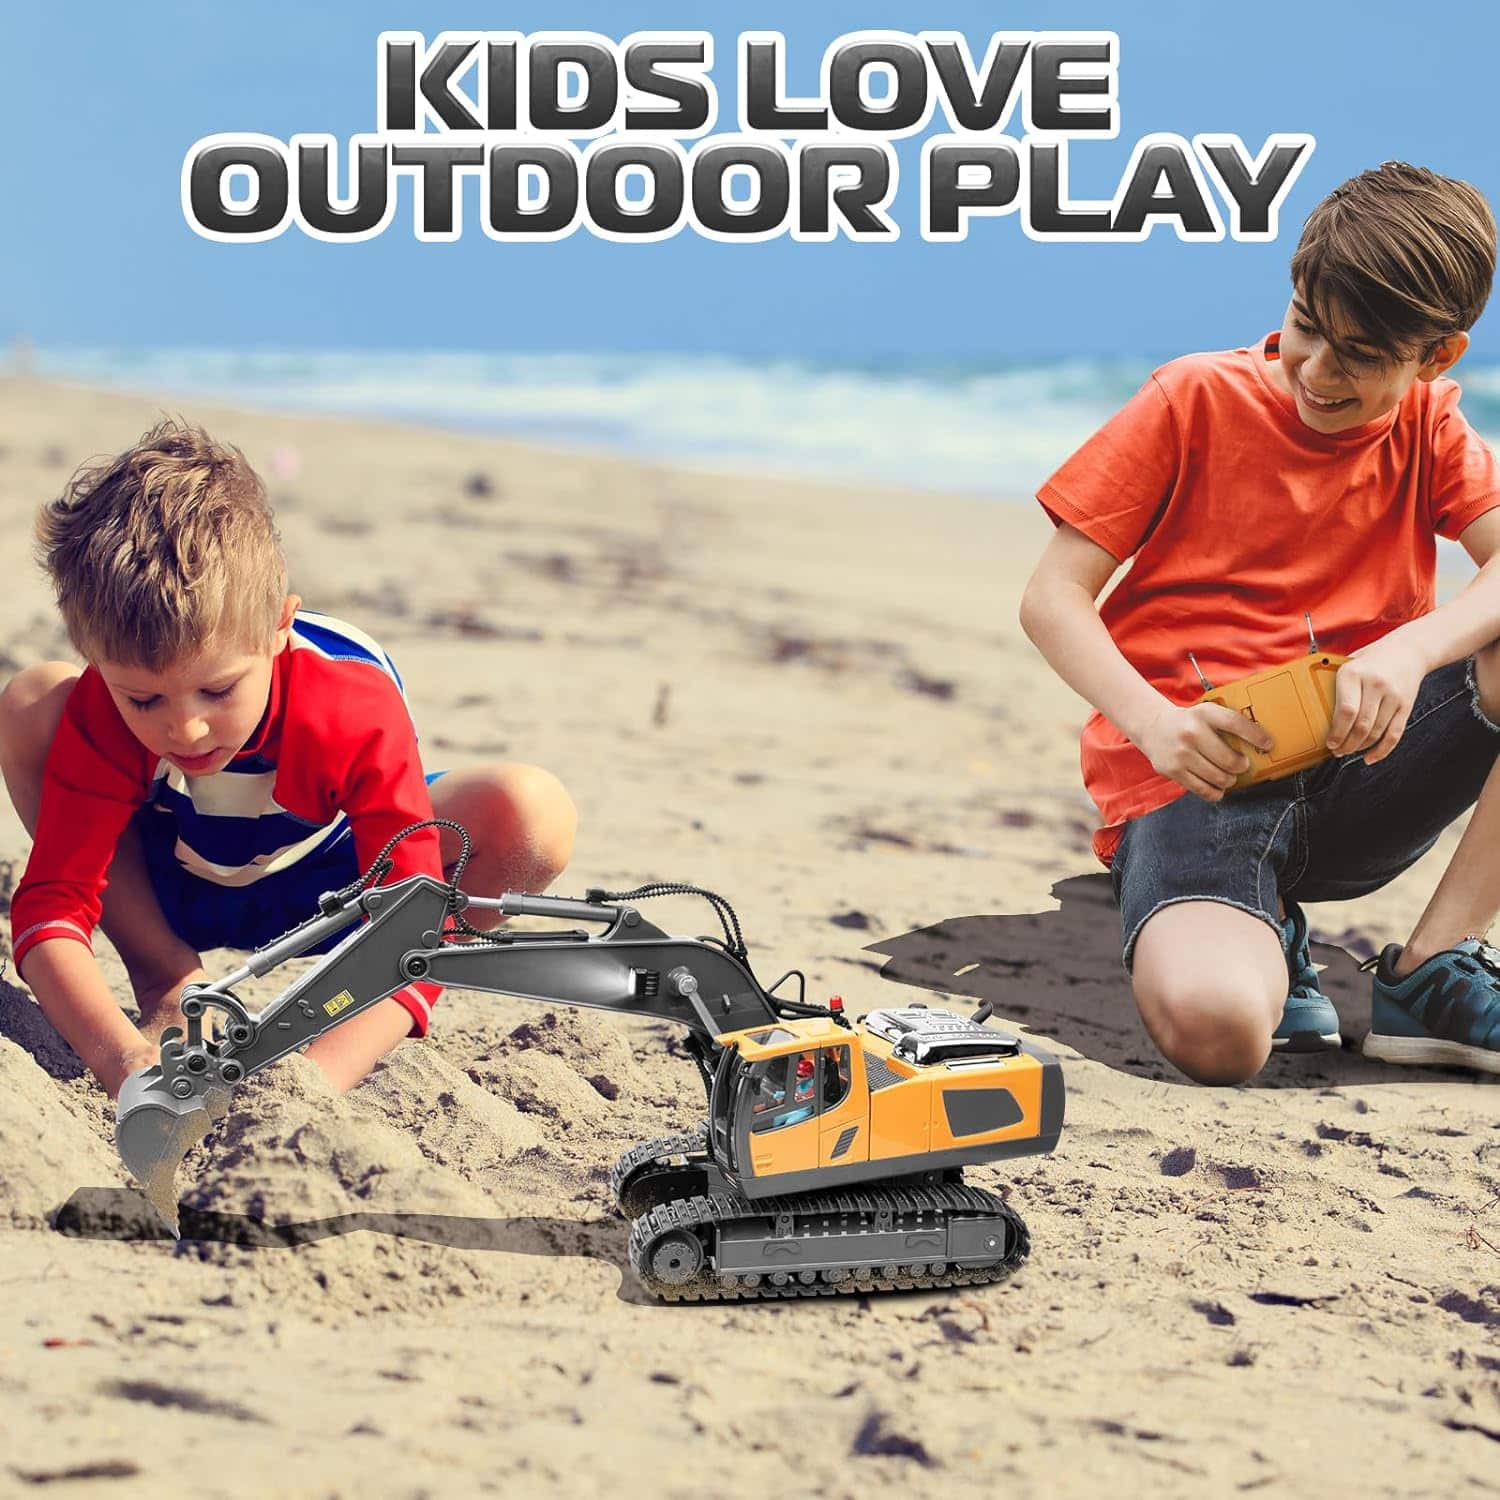 Samtop Remote Control Excavator Toys: A Review of the Ultimate Construction Vehicle for Kids